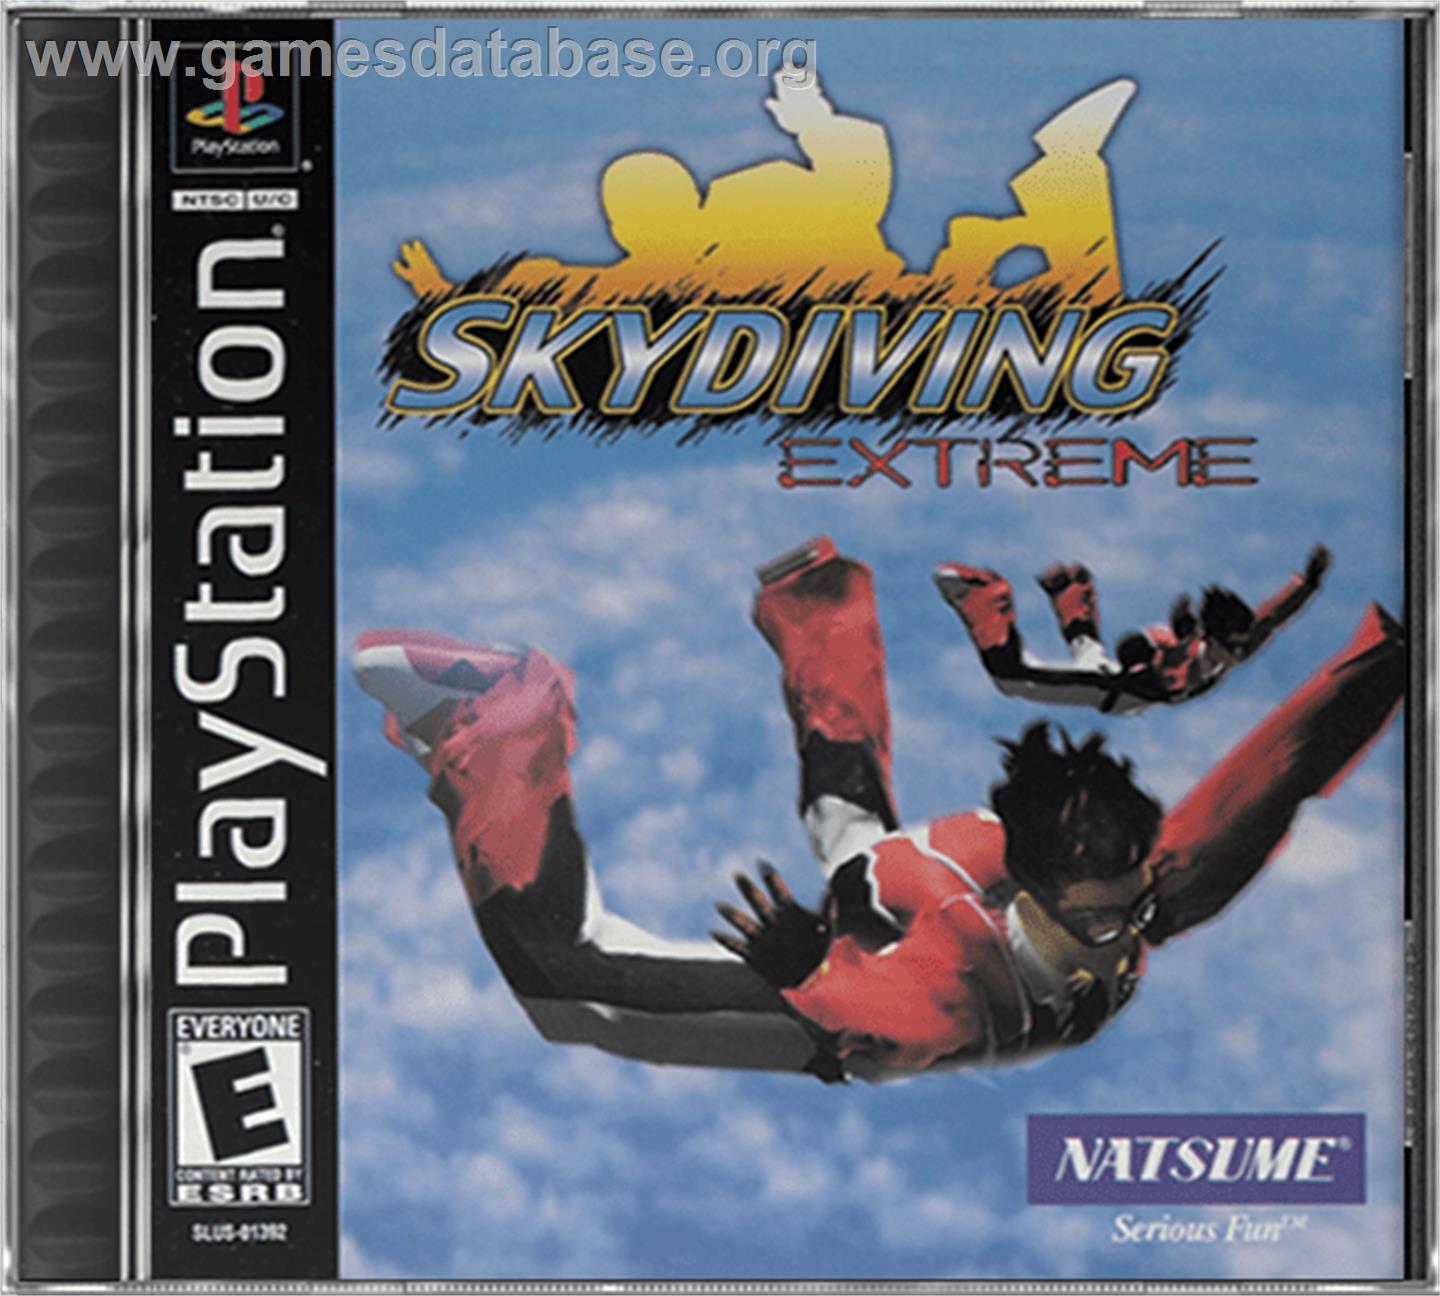 Skydiving Extreme - Sony Playstation - Artwork - Box